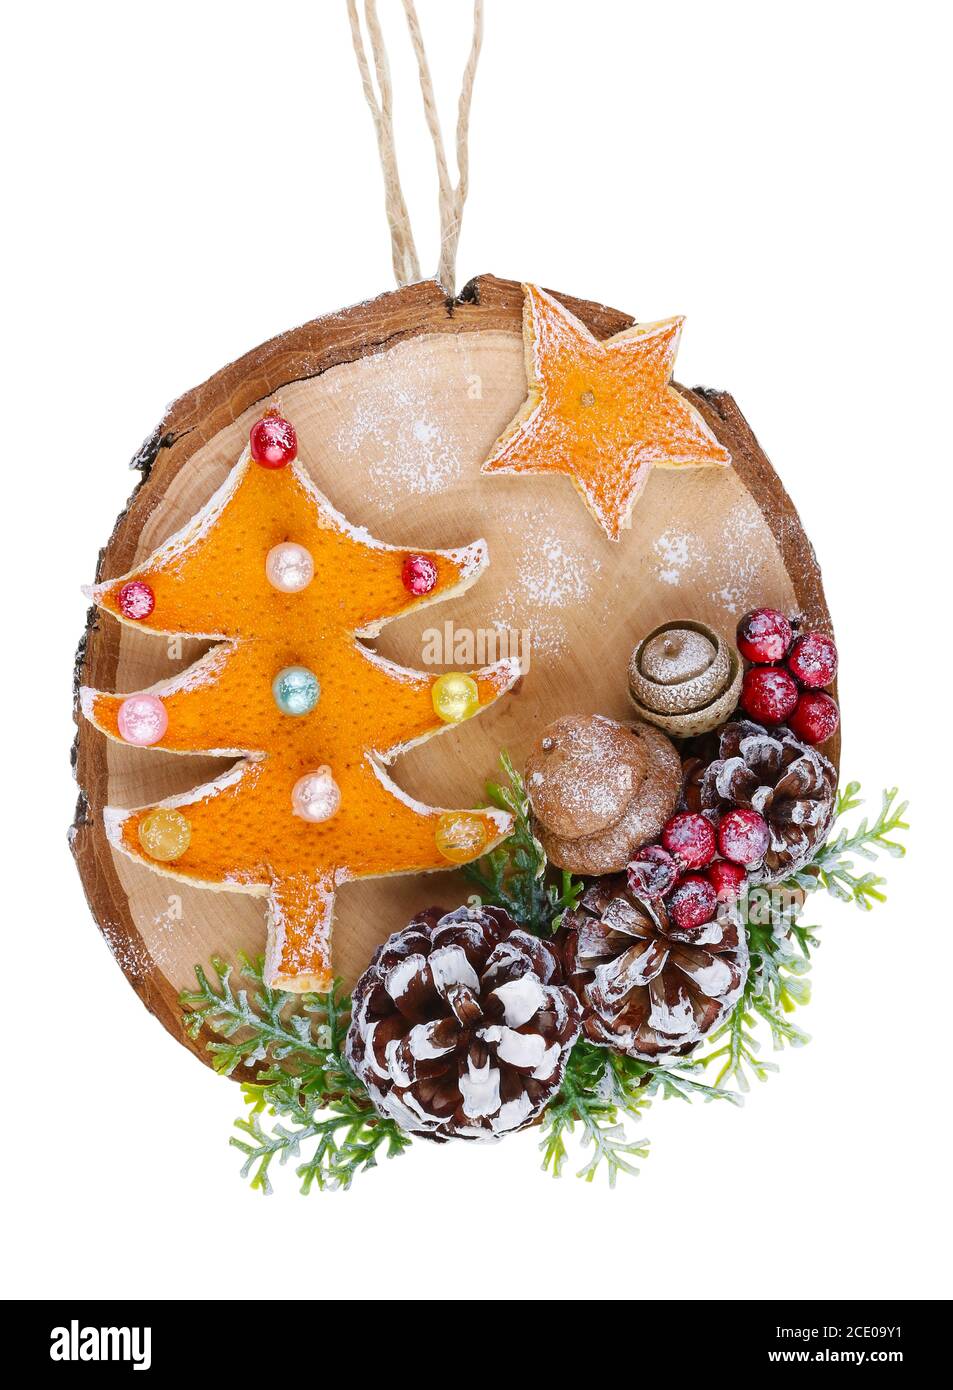 Christmas homemade decoration toy  in rustic style made  of dry red orange peels, cones and  berries and wooden cut slice  isola Stock Photo